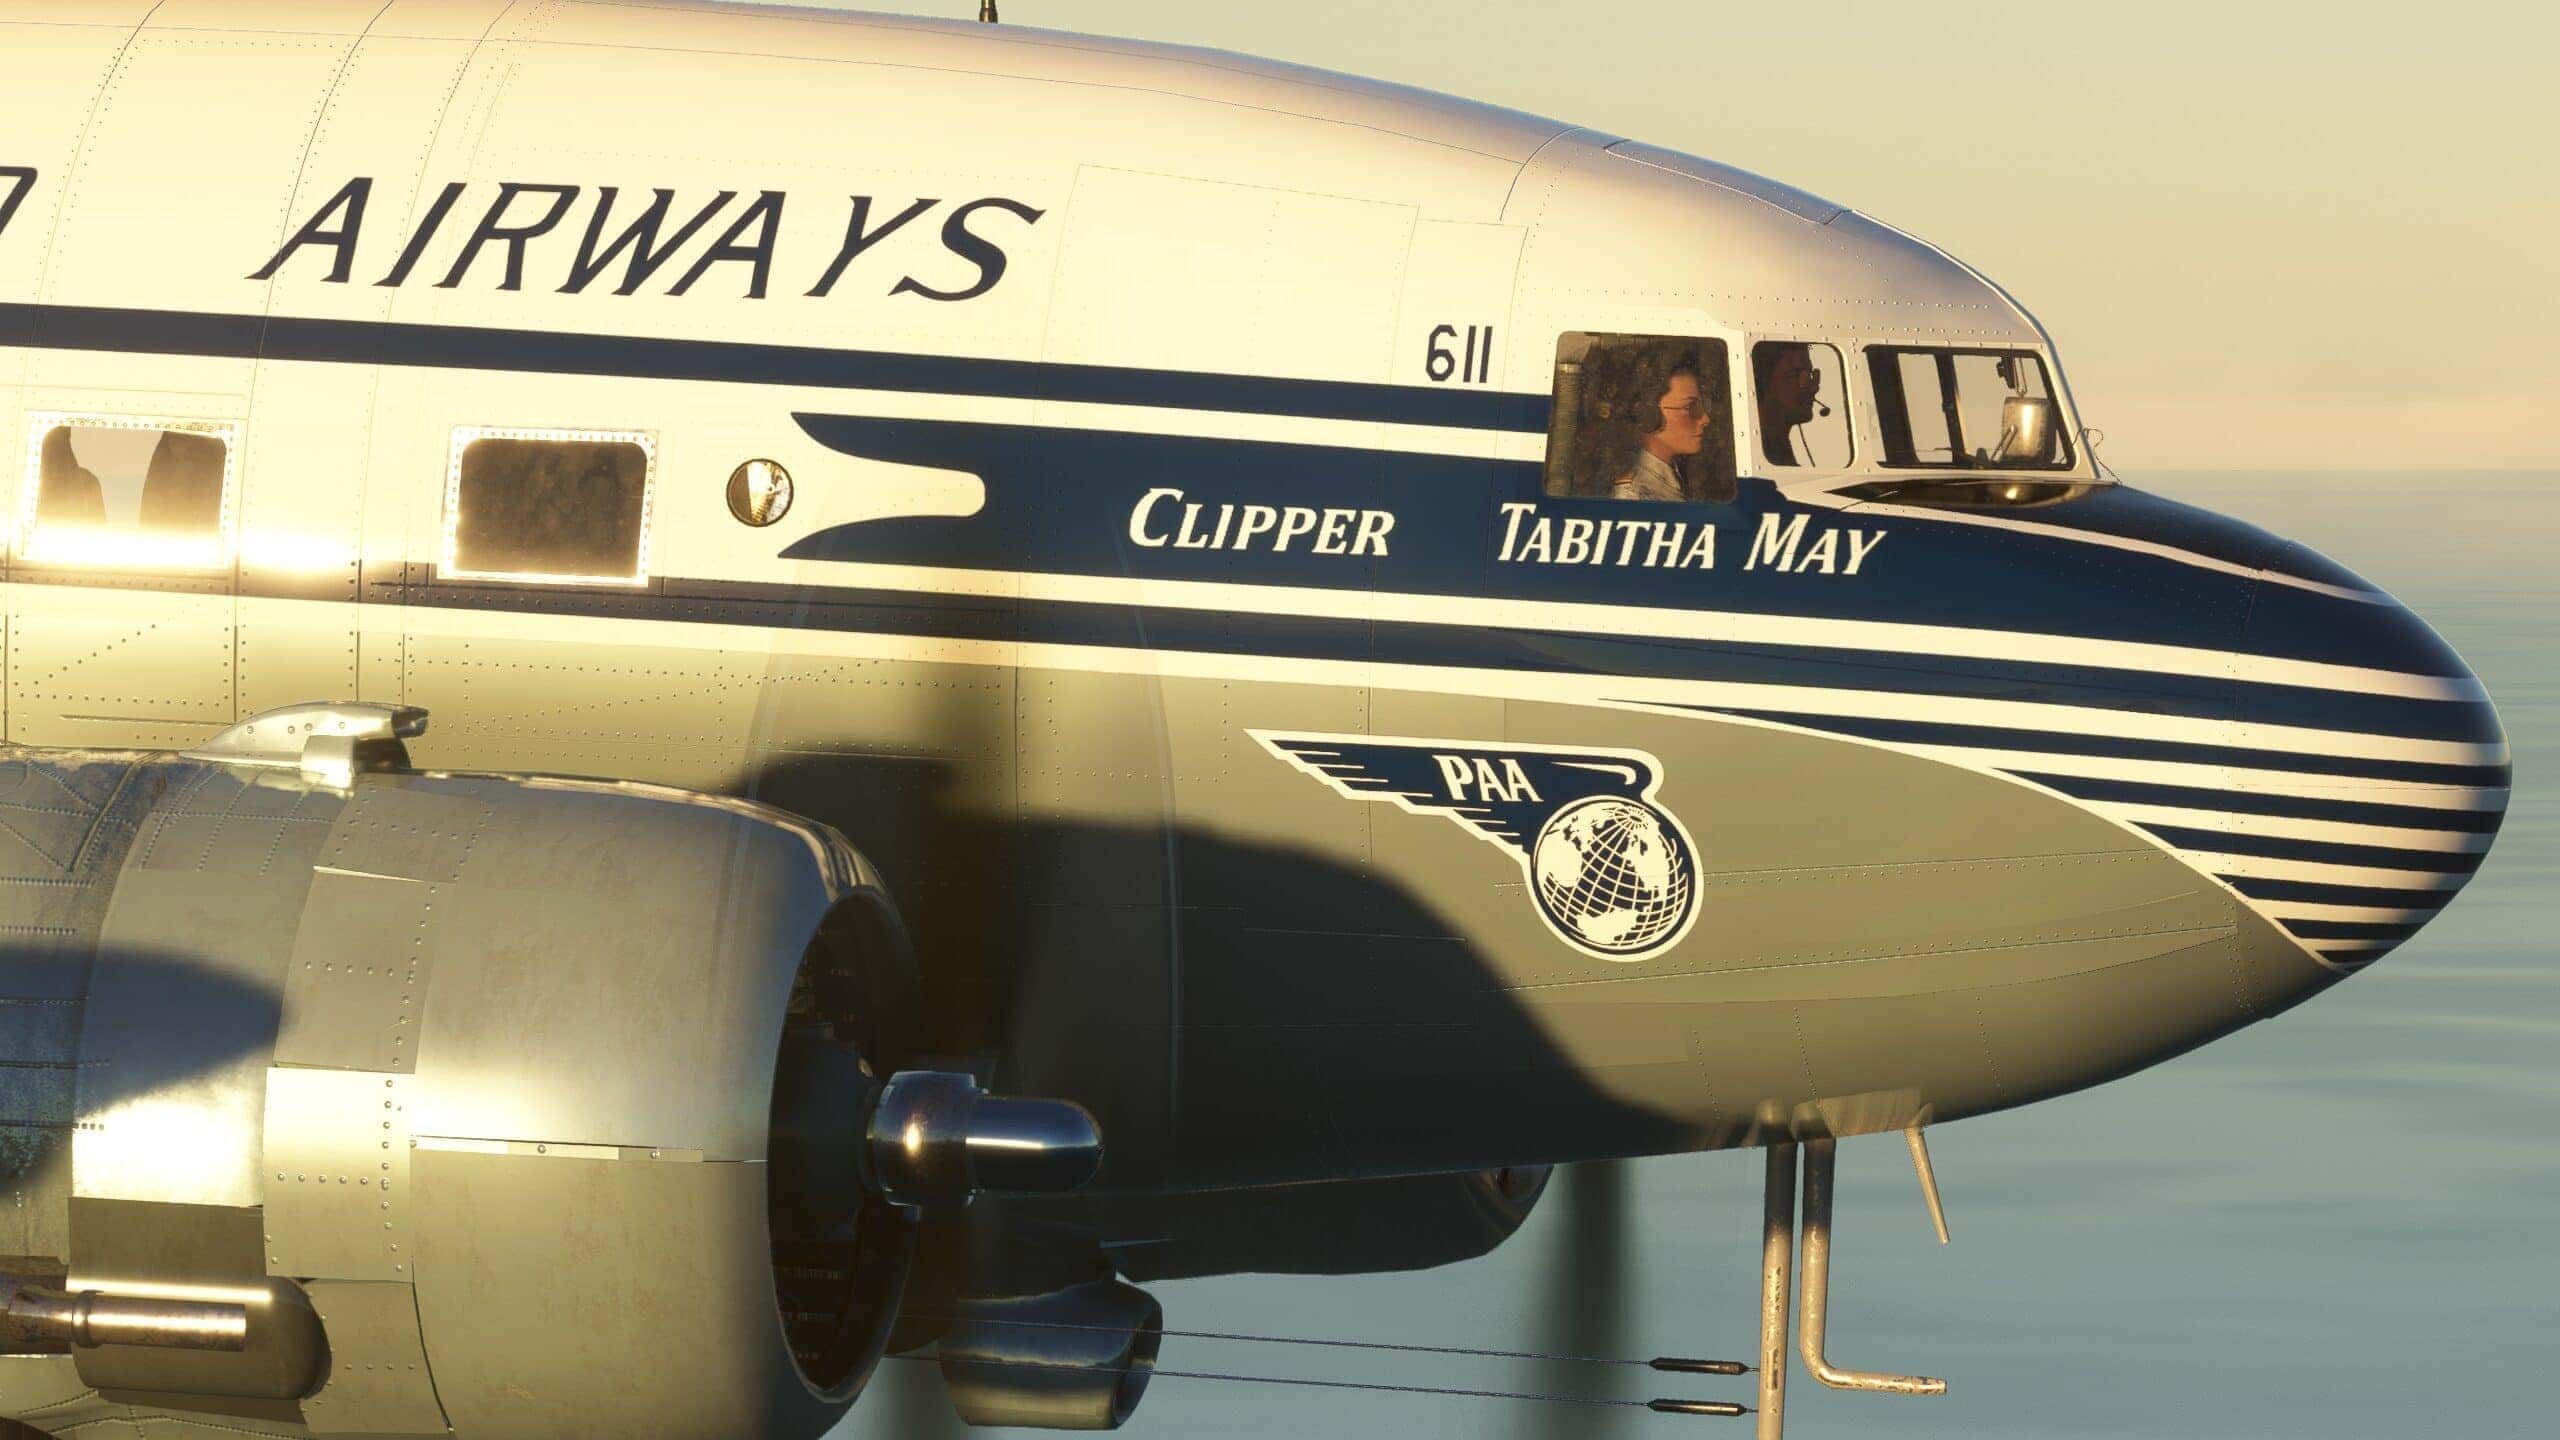 MSFS DC-3 Pan am livery 